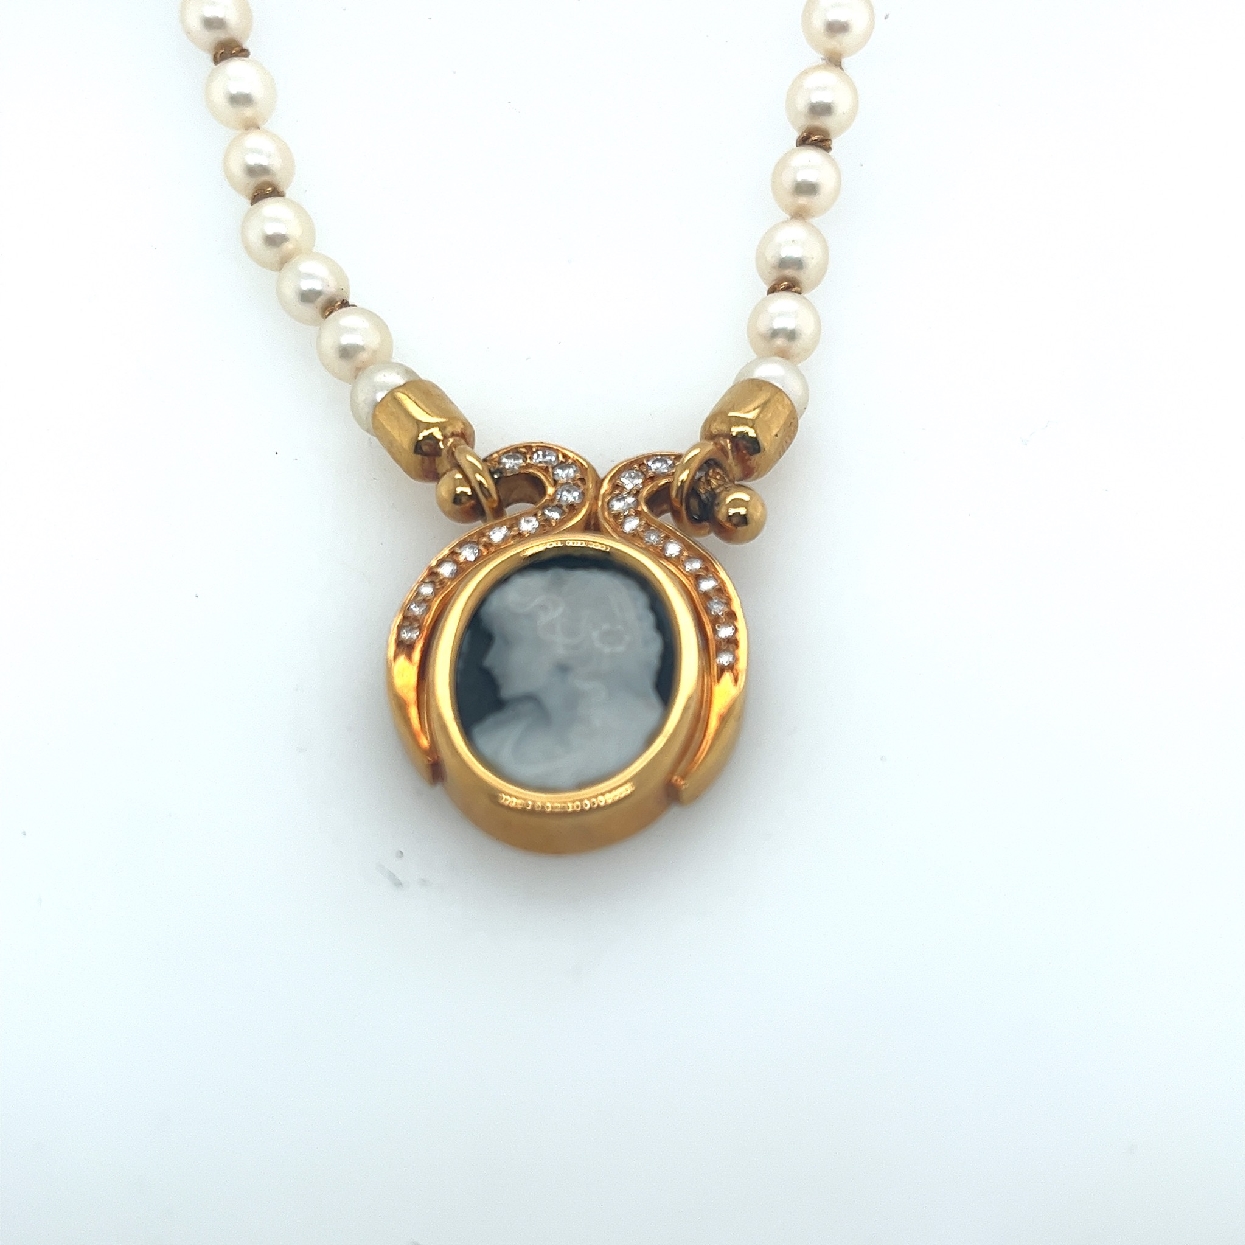 18K Yellow Gold Stationary Sardonyx Cameo Pendant on Hand Knotted White Pearl Strand

16 Inches in Total Length